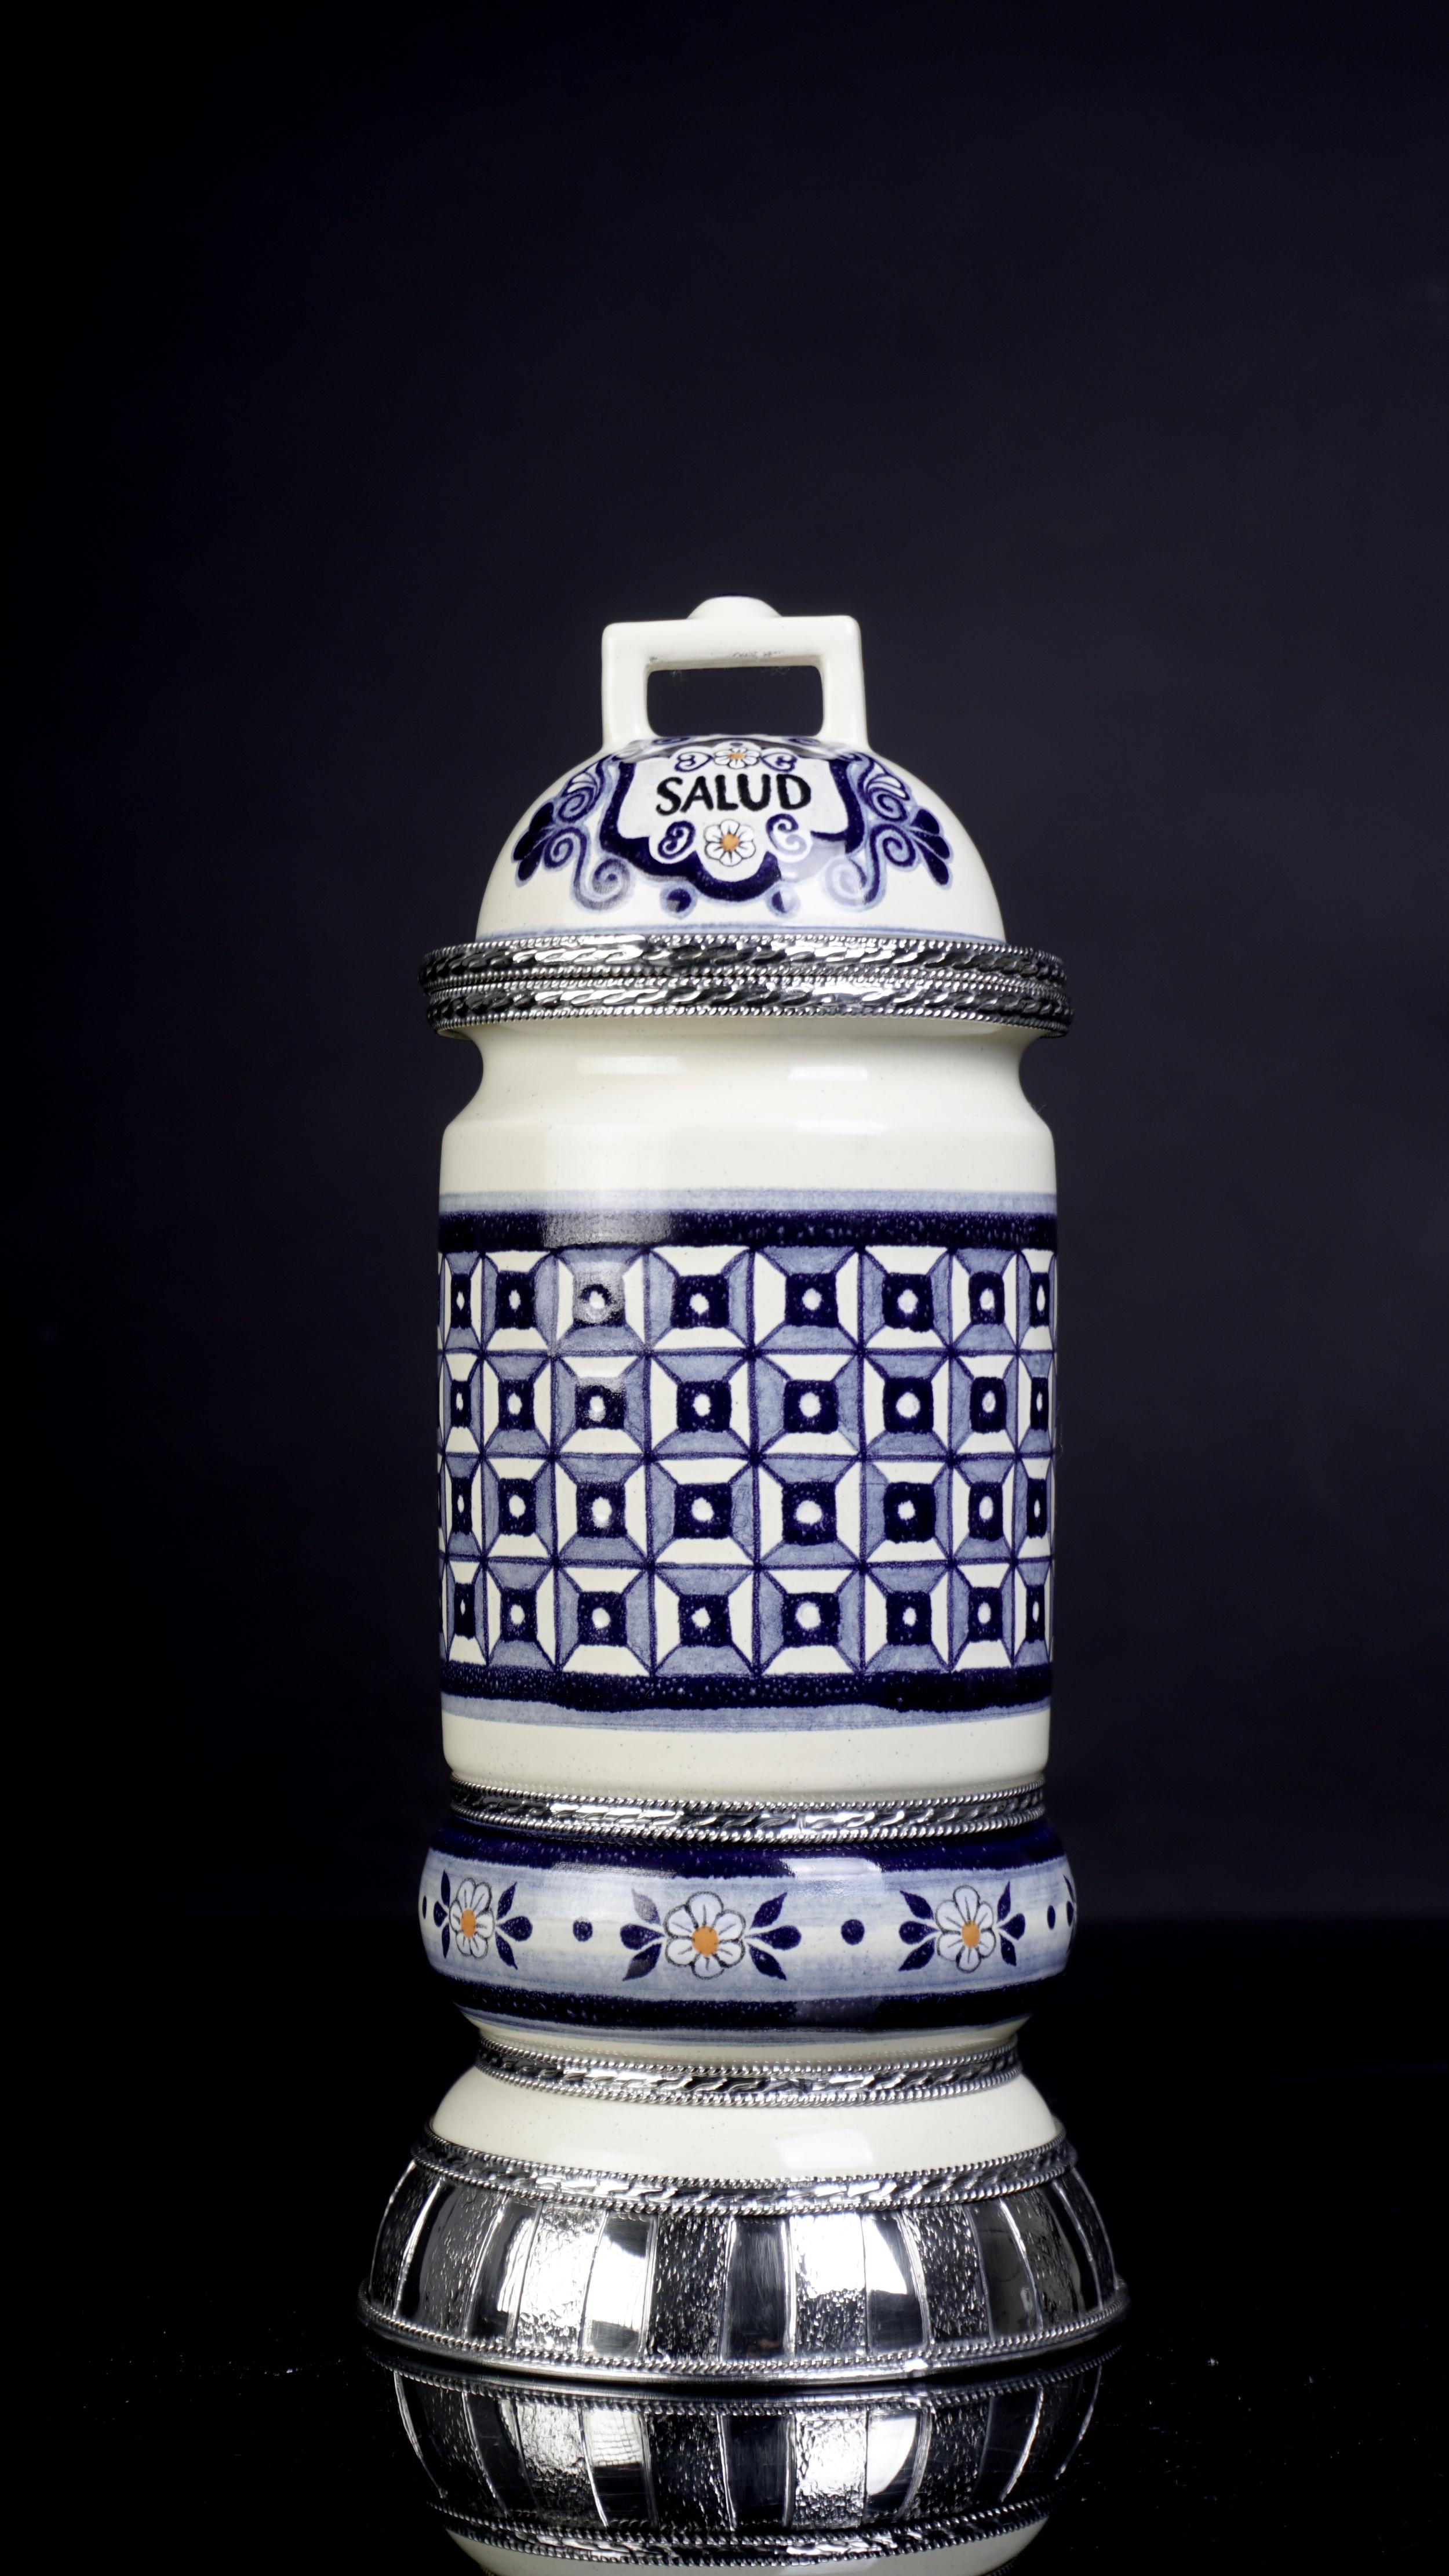 Always unique pieces are what you are going to hear about Jesus Guerrero Santo's work, all the pieces are handmade and created one by one it takes months to produce each piece.
This ceramic and white metal (alpaca) base, was created in Tonalá,